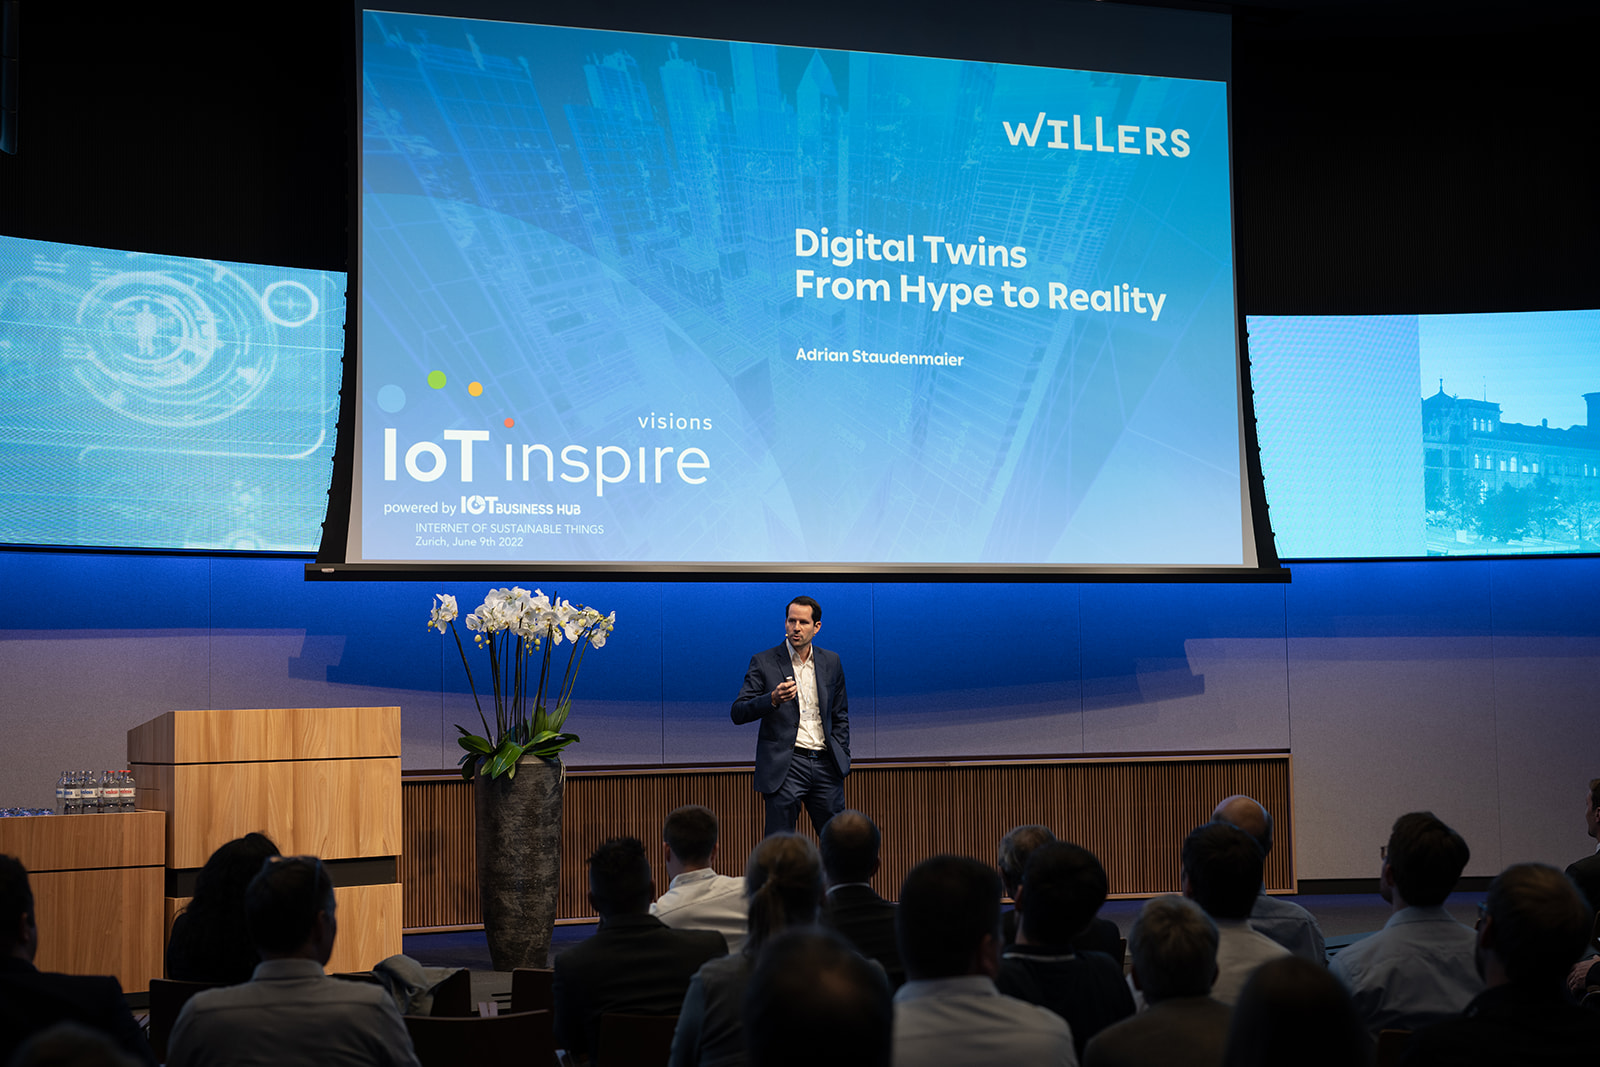 Key-note Presentation of Adrian Staudenmaier (Division Manager at Willers) at IoT Inspire Zurich 2022